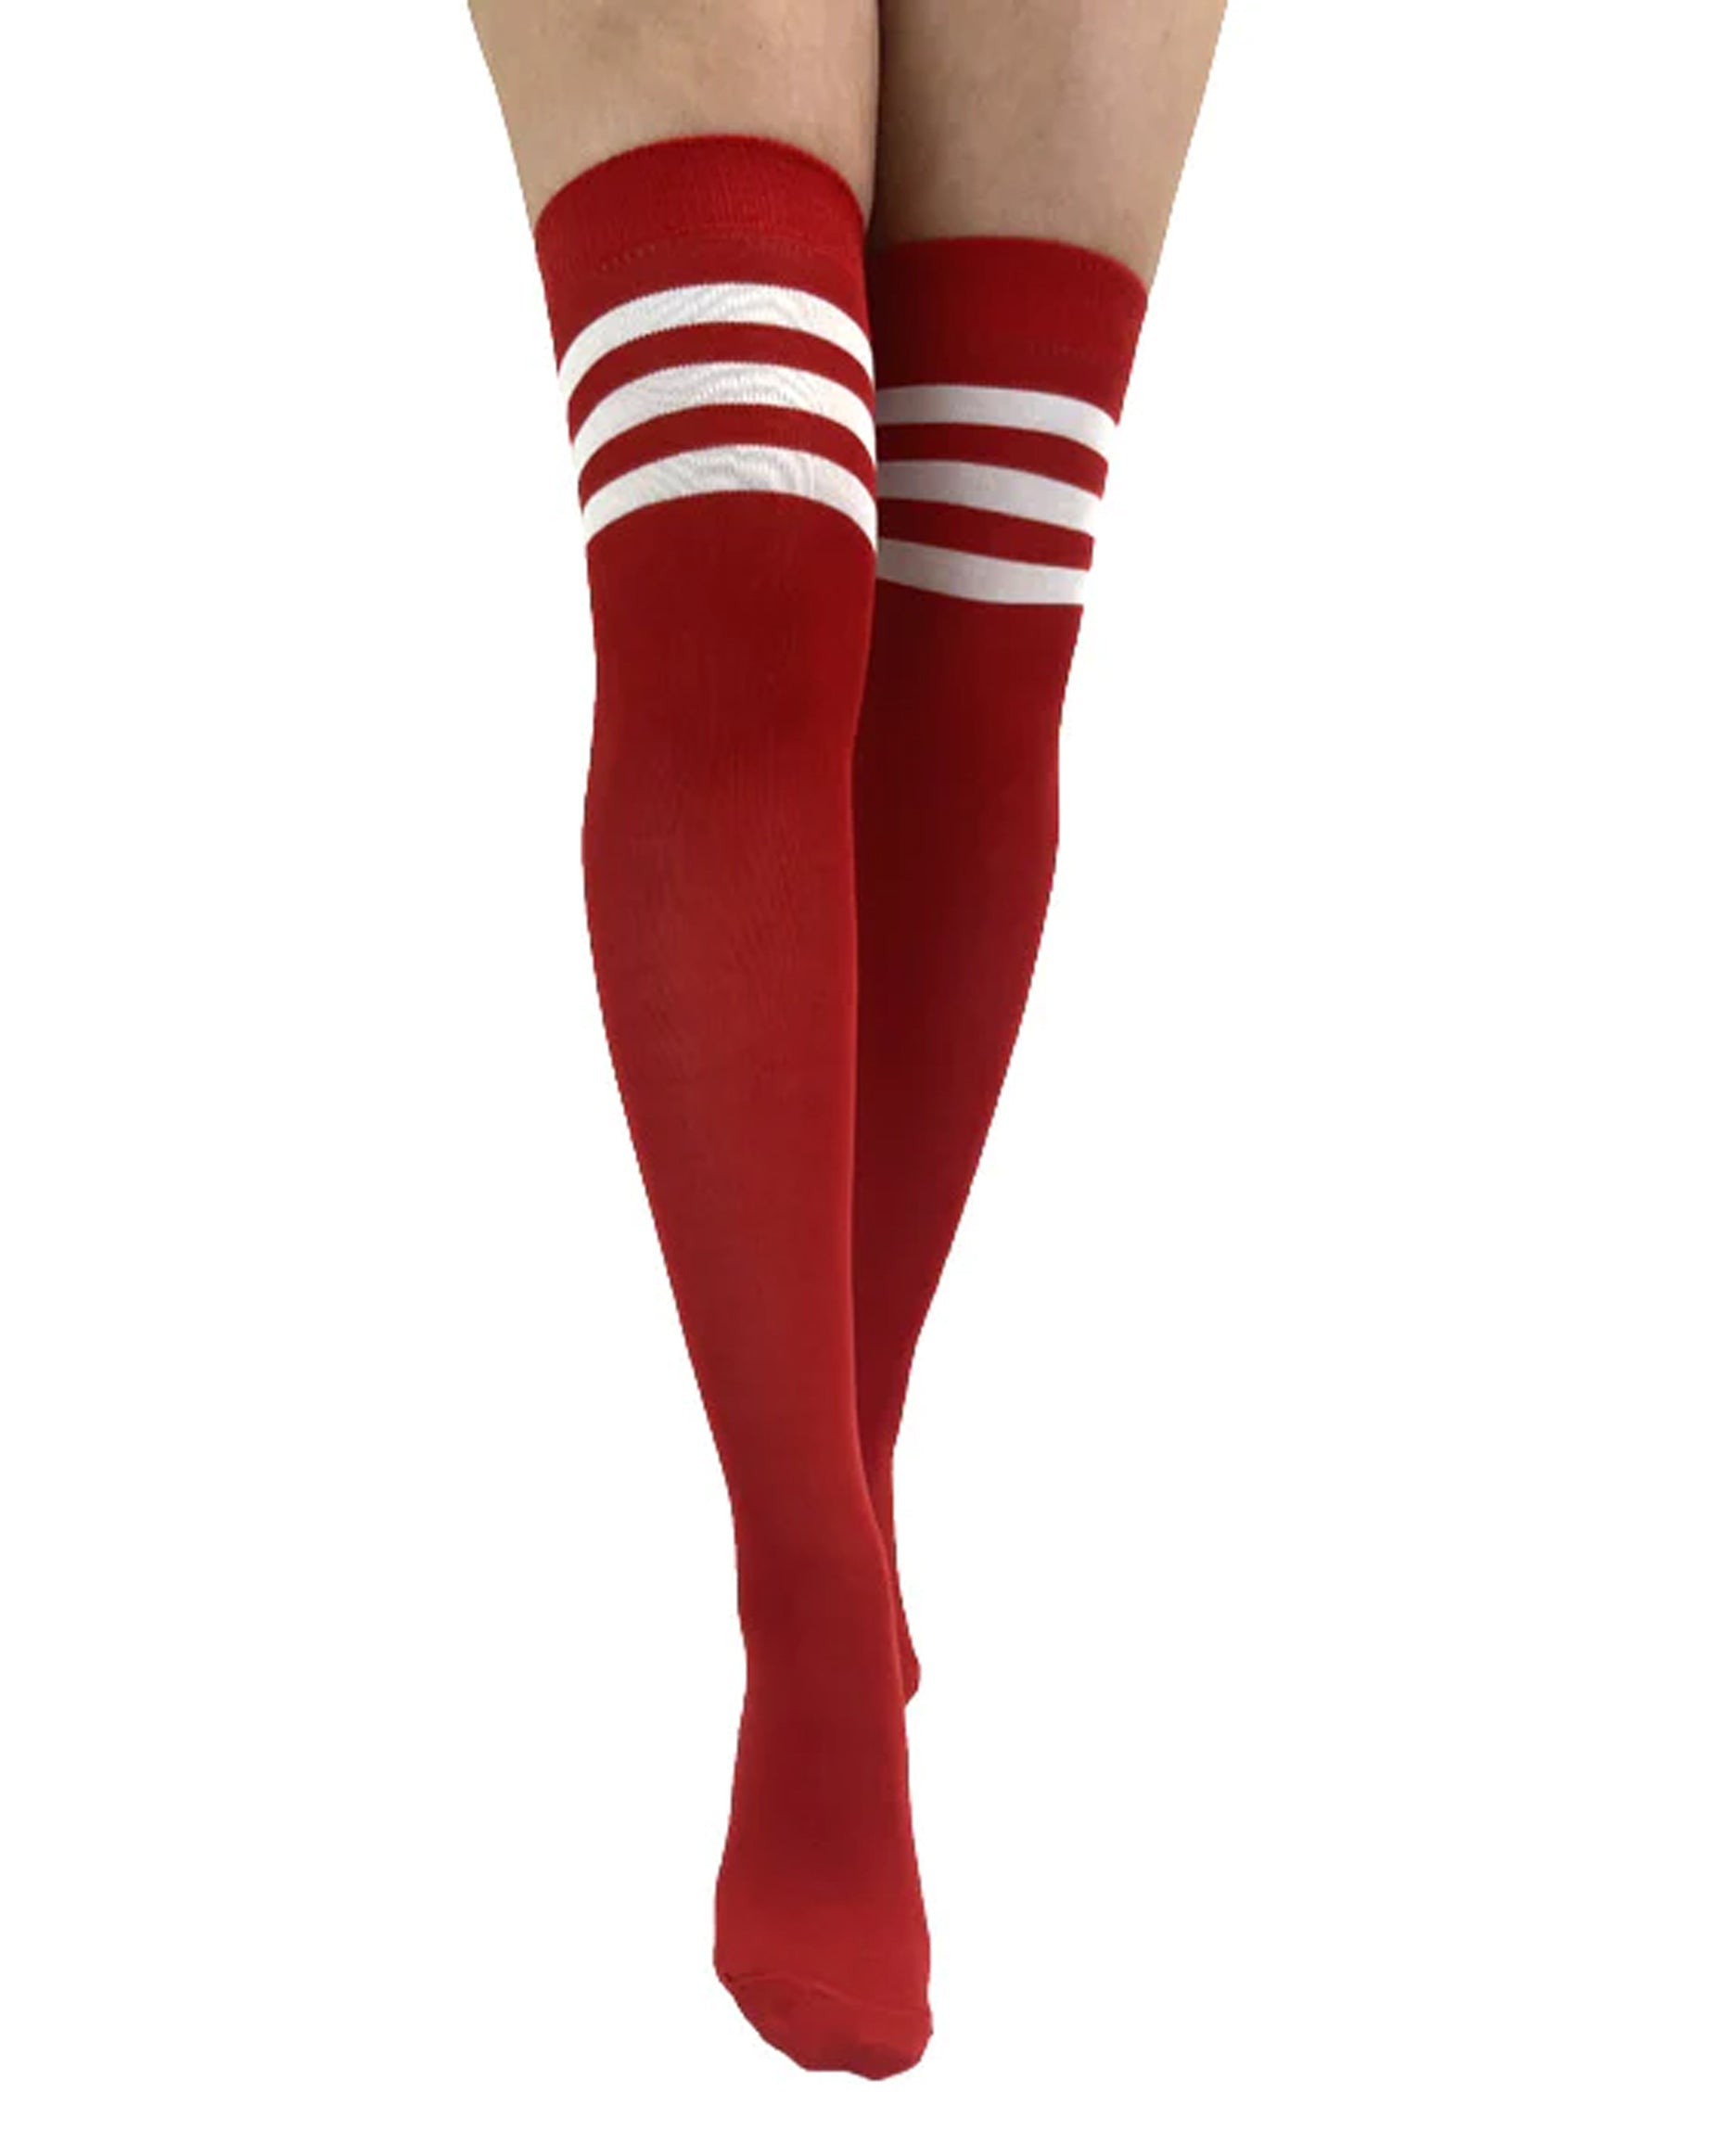 Pamela Mann Referee Over The Knee Socks - Red cotton thigh high socks with 3 white stripes